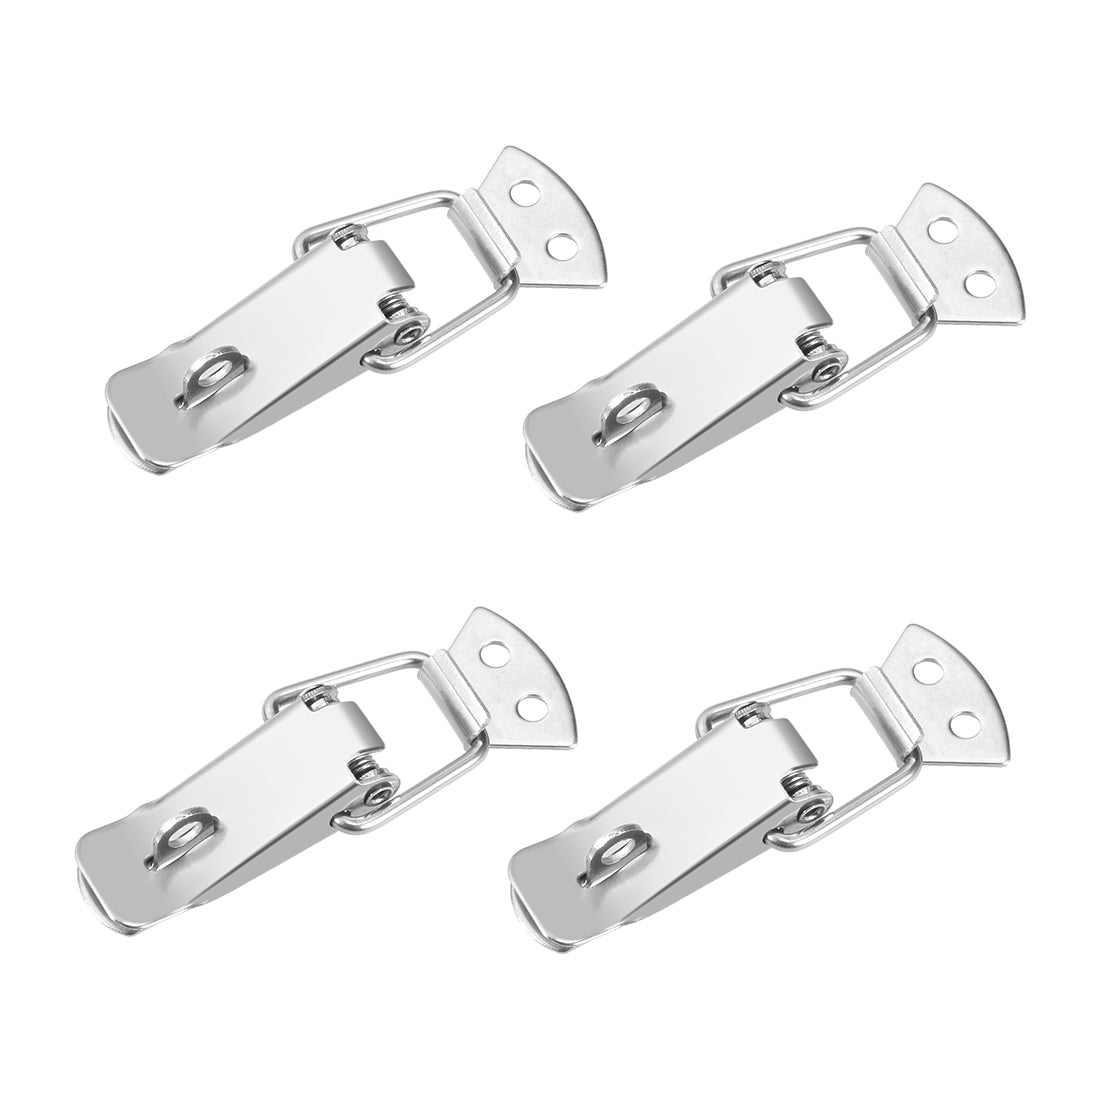 uxcell Uxcell Spring Loaded Toggle Latch Case Box Chest Trunk Latch Catches Hasps Clamps with Lock Hole 58 x 25 x 12mm Stainless Steel for Trunk Tool Case 4pcs